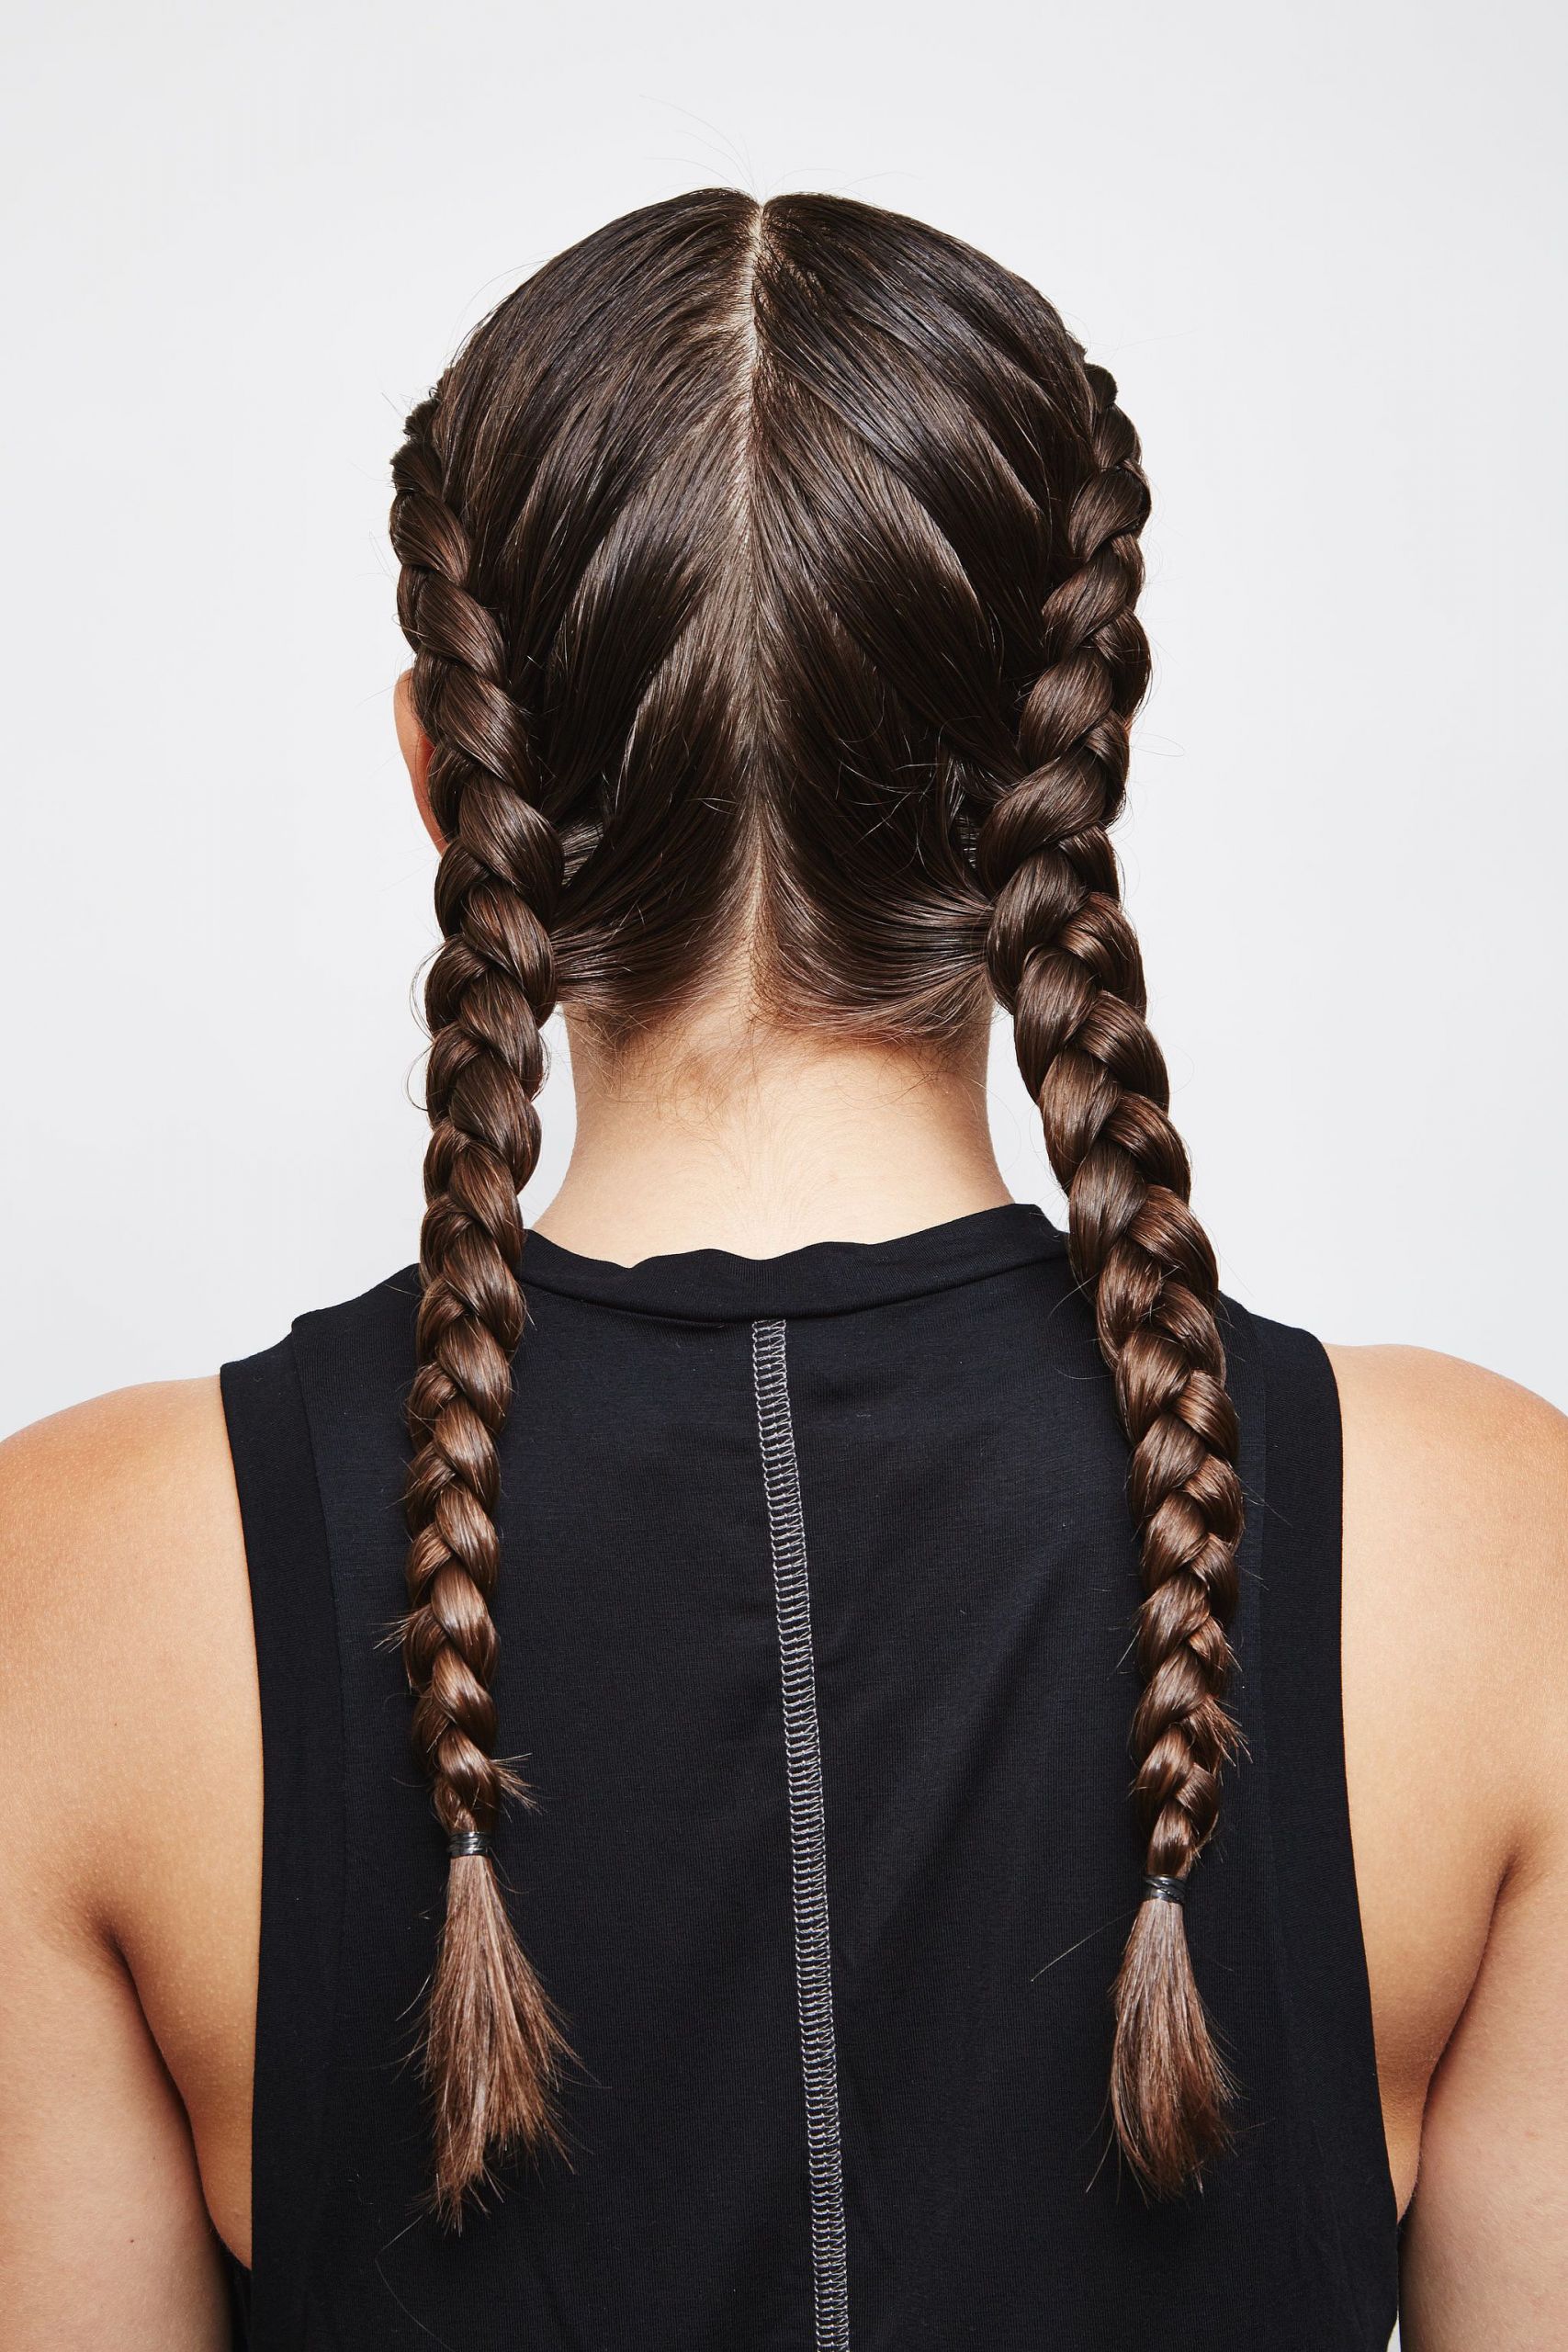 Cool French Braid Hairstyles
 Why Exactly Is It Called a French Braid